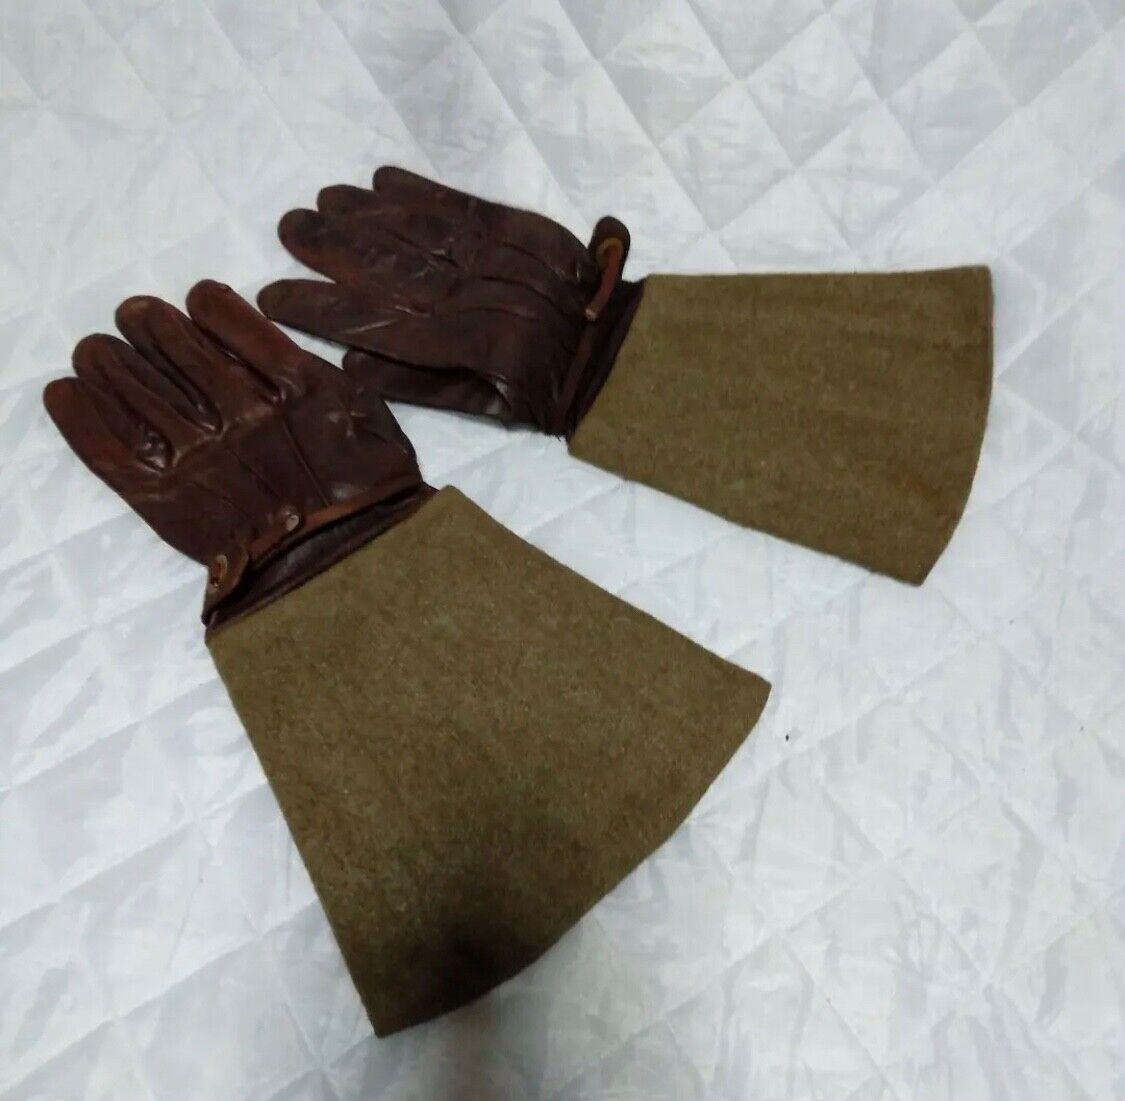 Worldwar2 original imperial japanese army leather vehicle gloves for winter